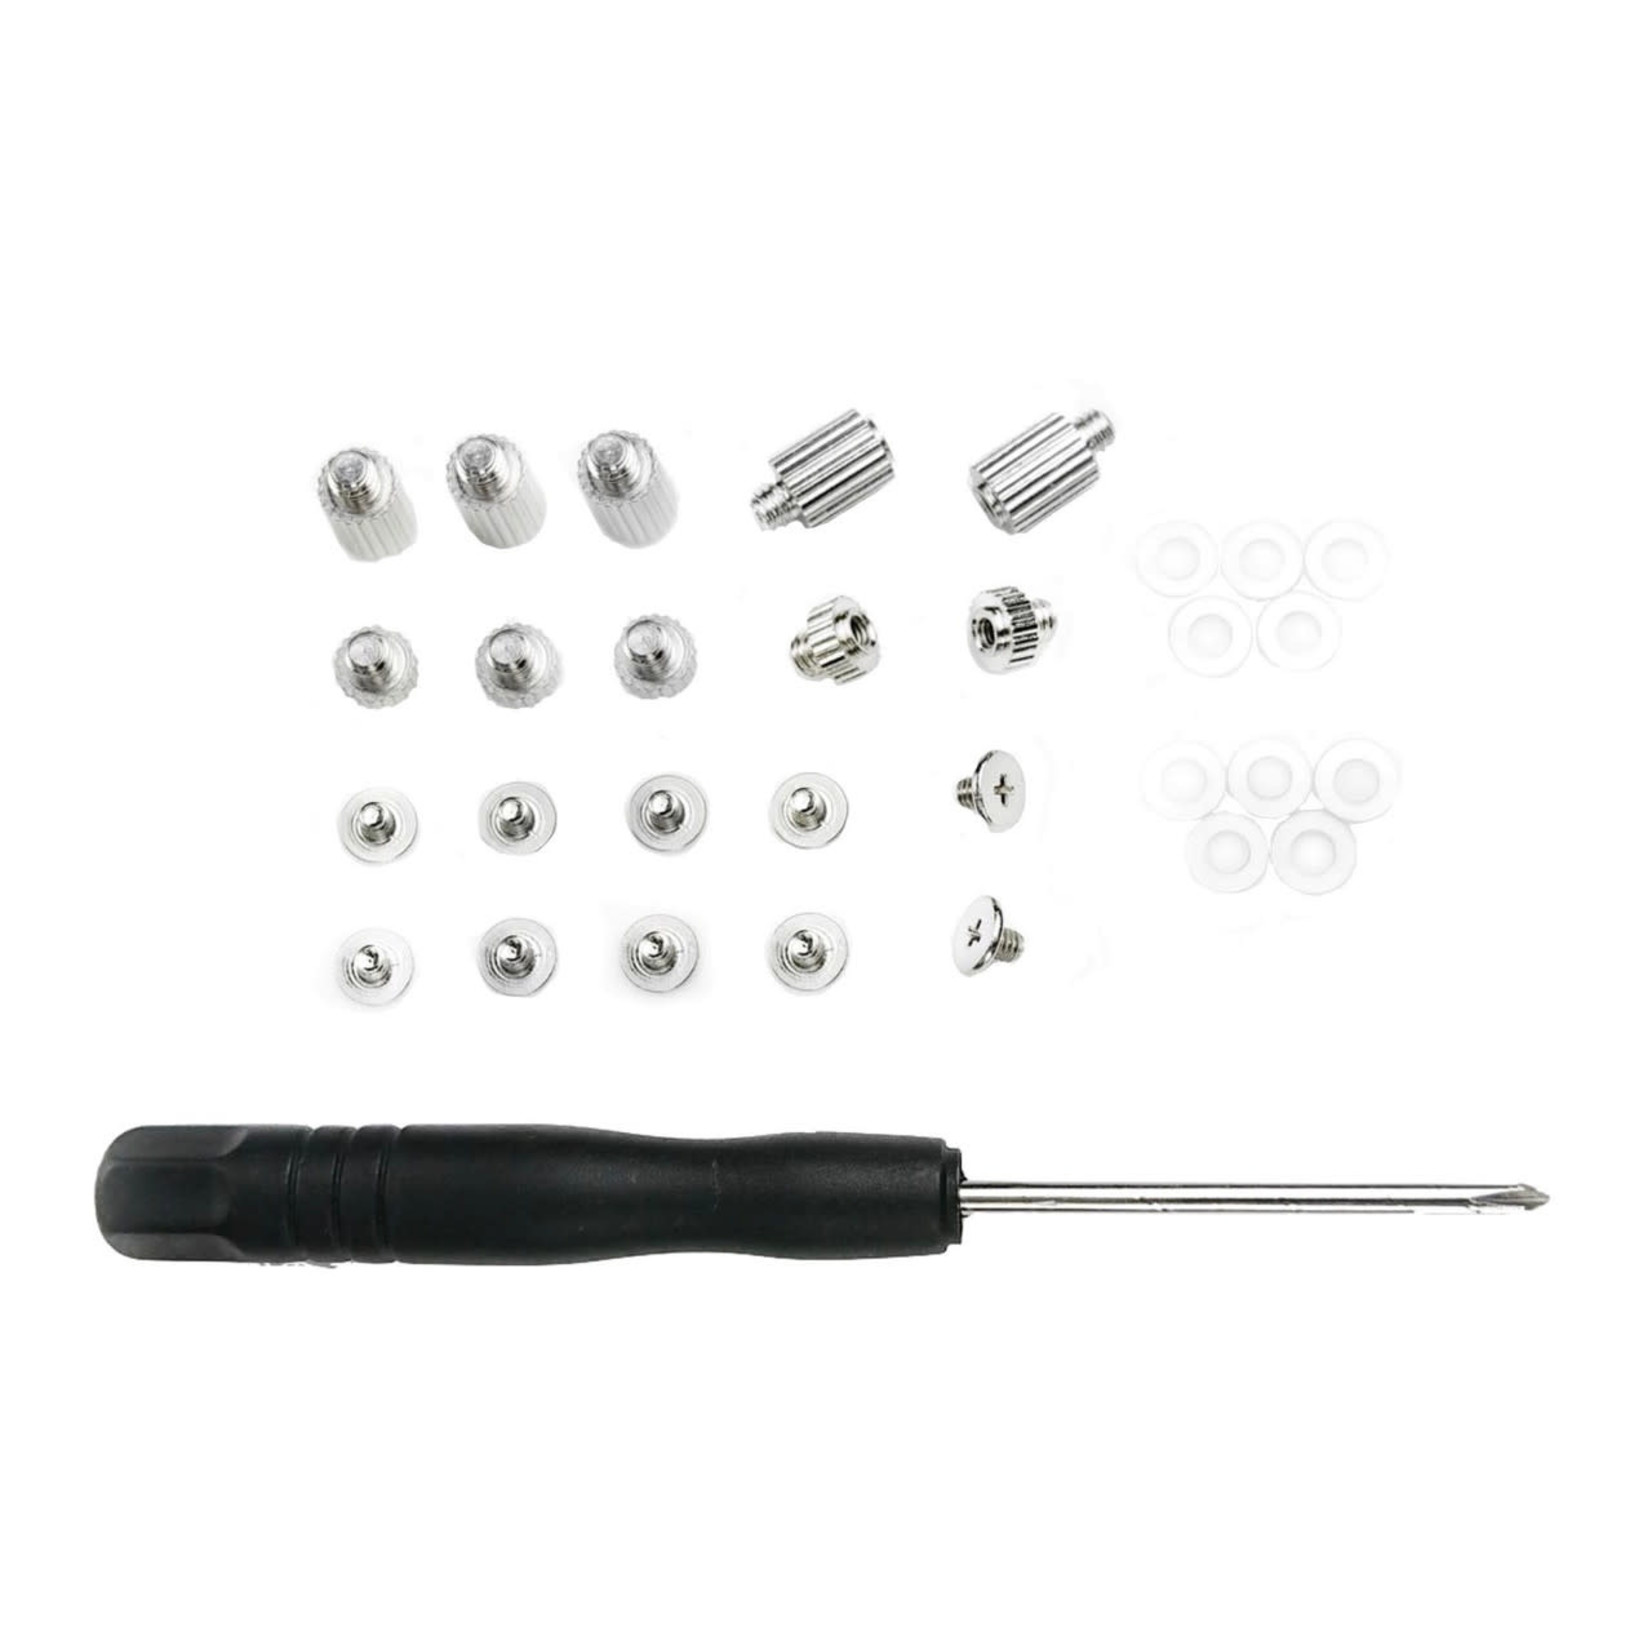 Micro Connectors Micro Connectors M.2 SSD Mounting Screws Kit for MSI and Gigabyte Motherboards